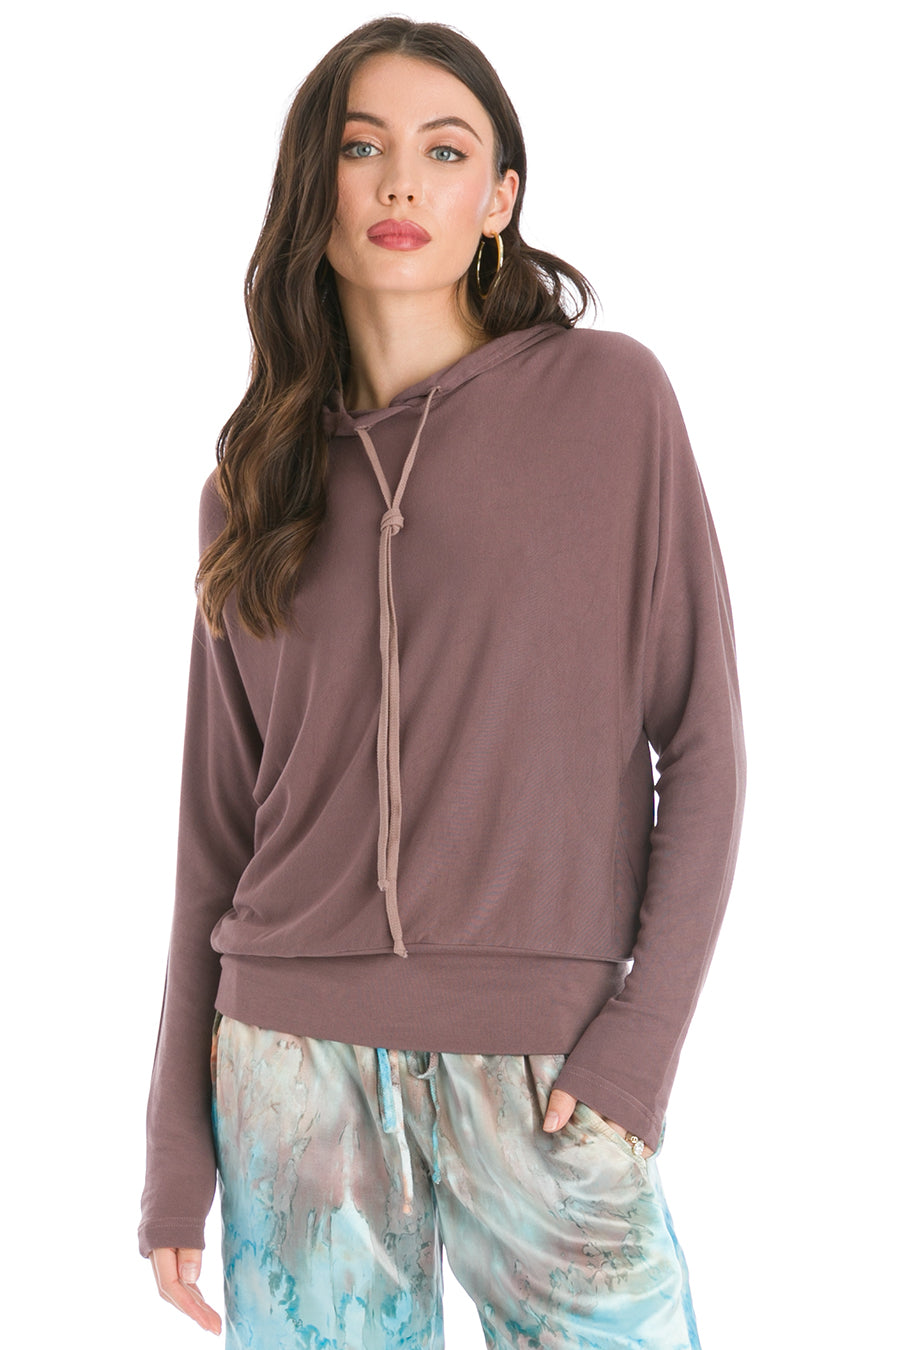 Hard Tail Forever Luxe Banded Pullover Hoodie - Mocha - M